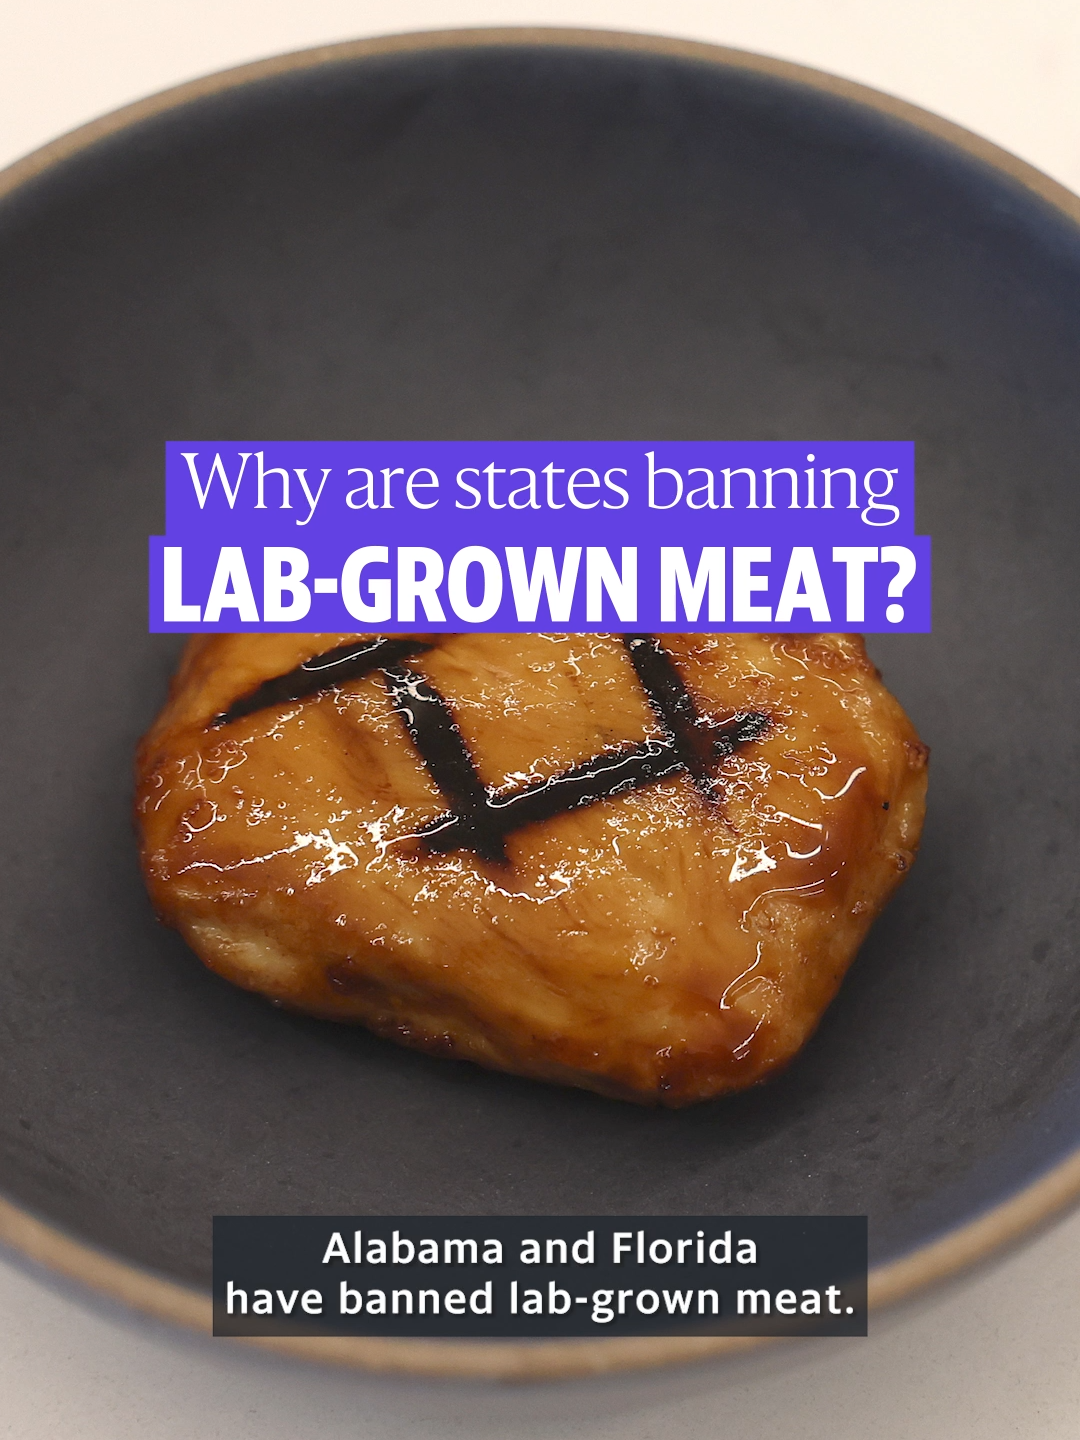 Alabama became the second U.S. state to ban lab-grown meat, joining Florida in outlawing the alternative protein. Here's why there's debate. #news #meatalternative #plantbased #florida #alabama #yahoonews